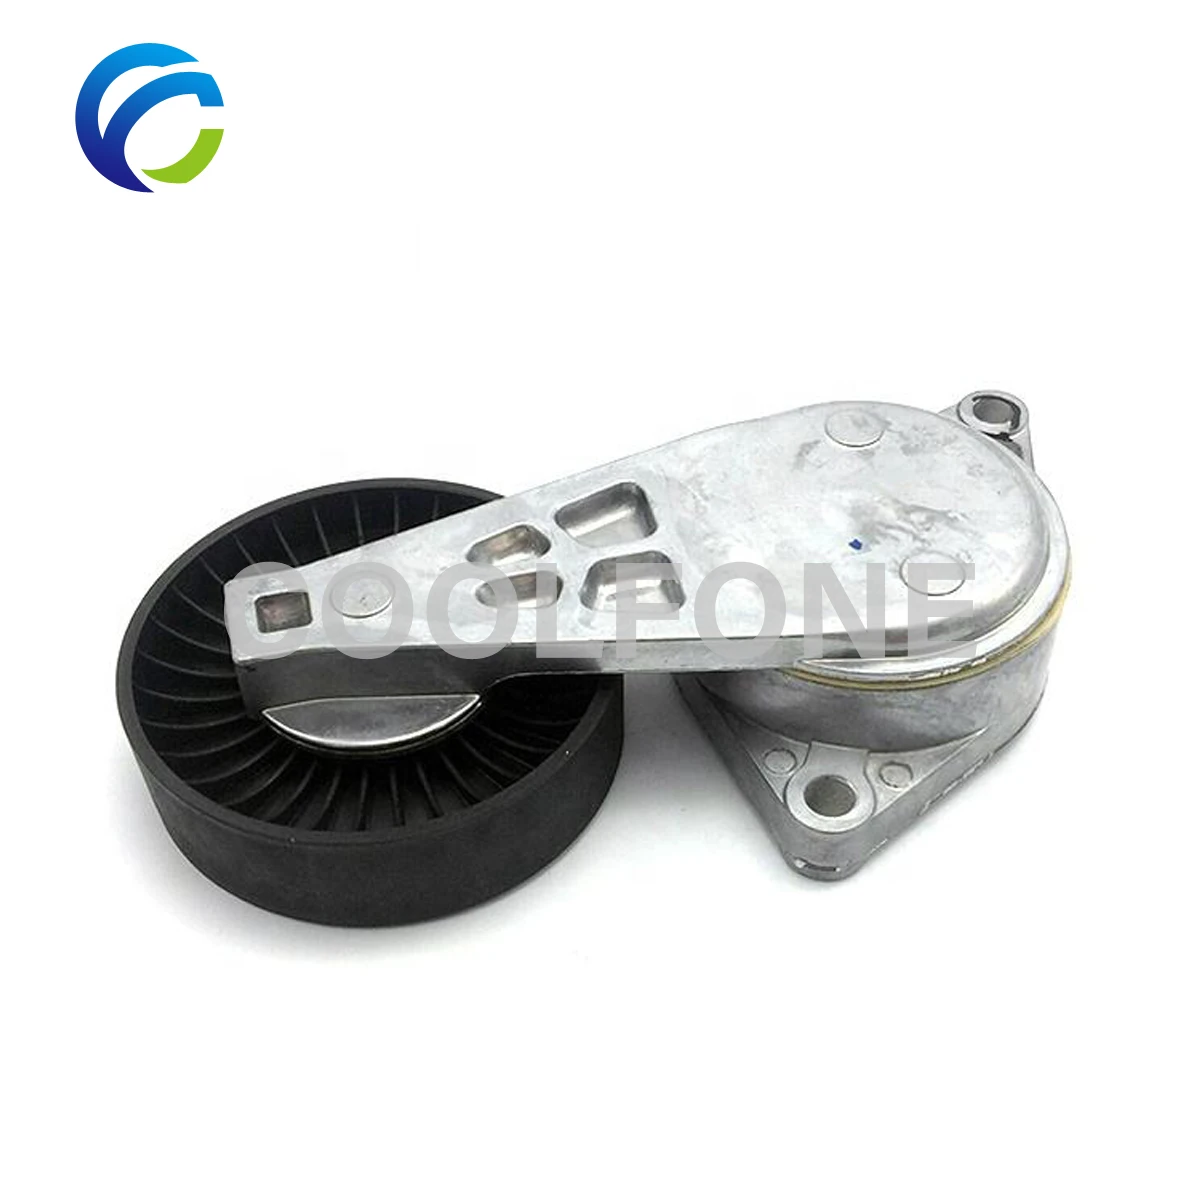 

Drive Belt Automatic Tensioner for LAND ROVER FREELANDER MG ZS ZT ROVER 45 75 800 2.0 2.5 PQG100141 PQG100141L PQG100142